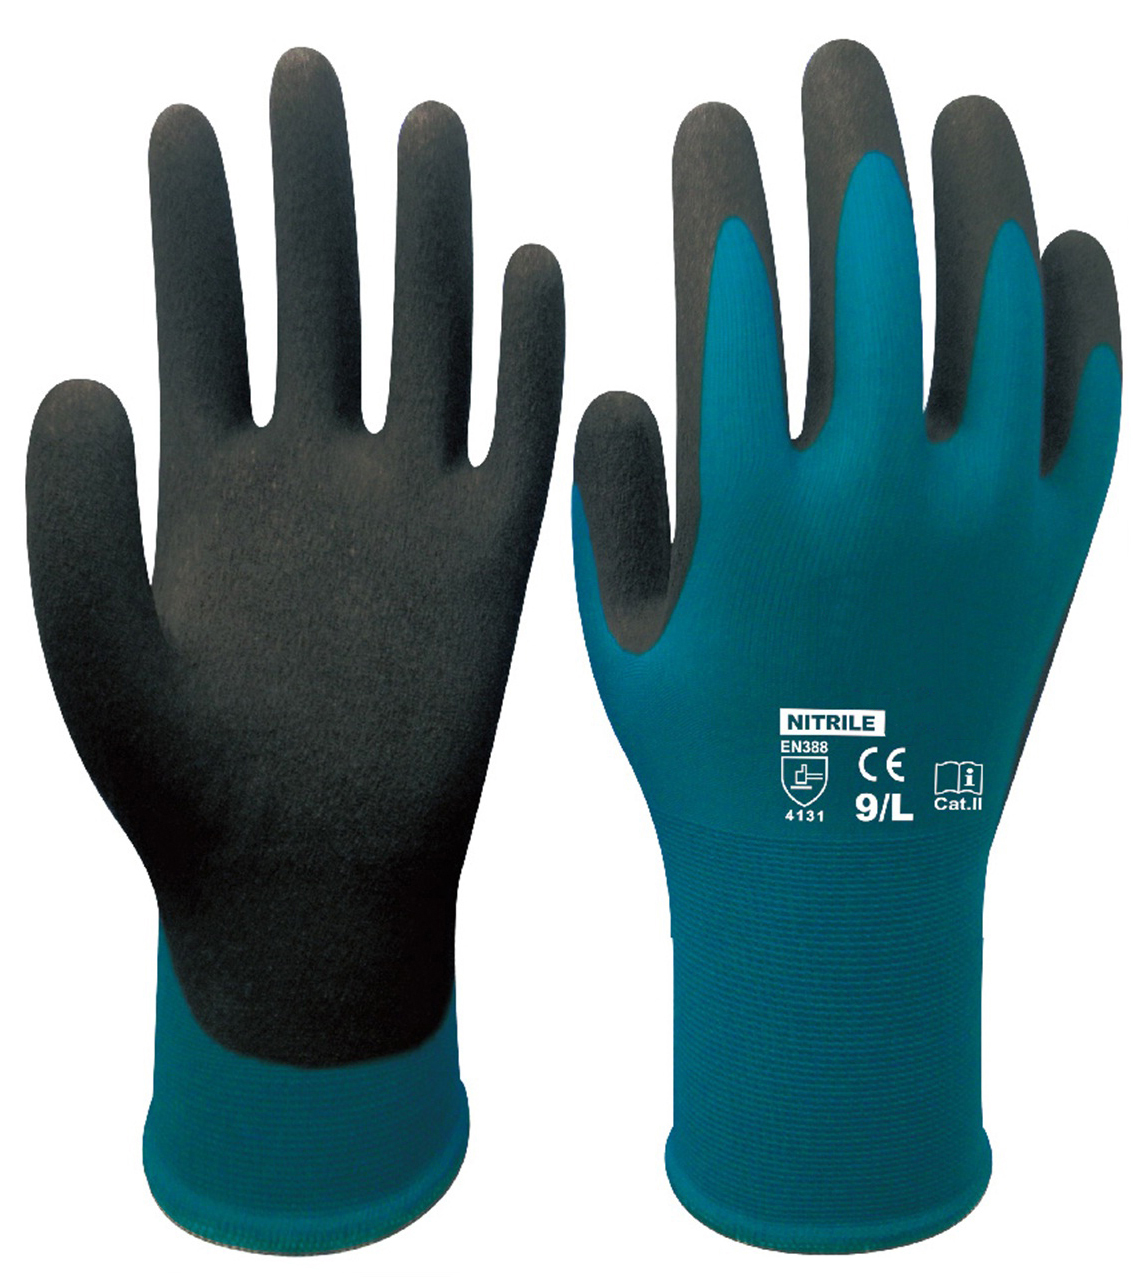 Dexterity 18 Guage Nylon Shell Sandy-Nitrile-Dipped Work Gloves